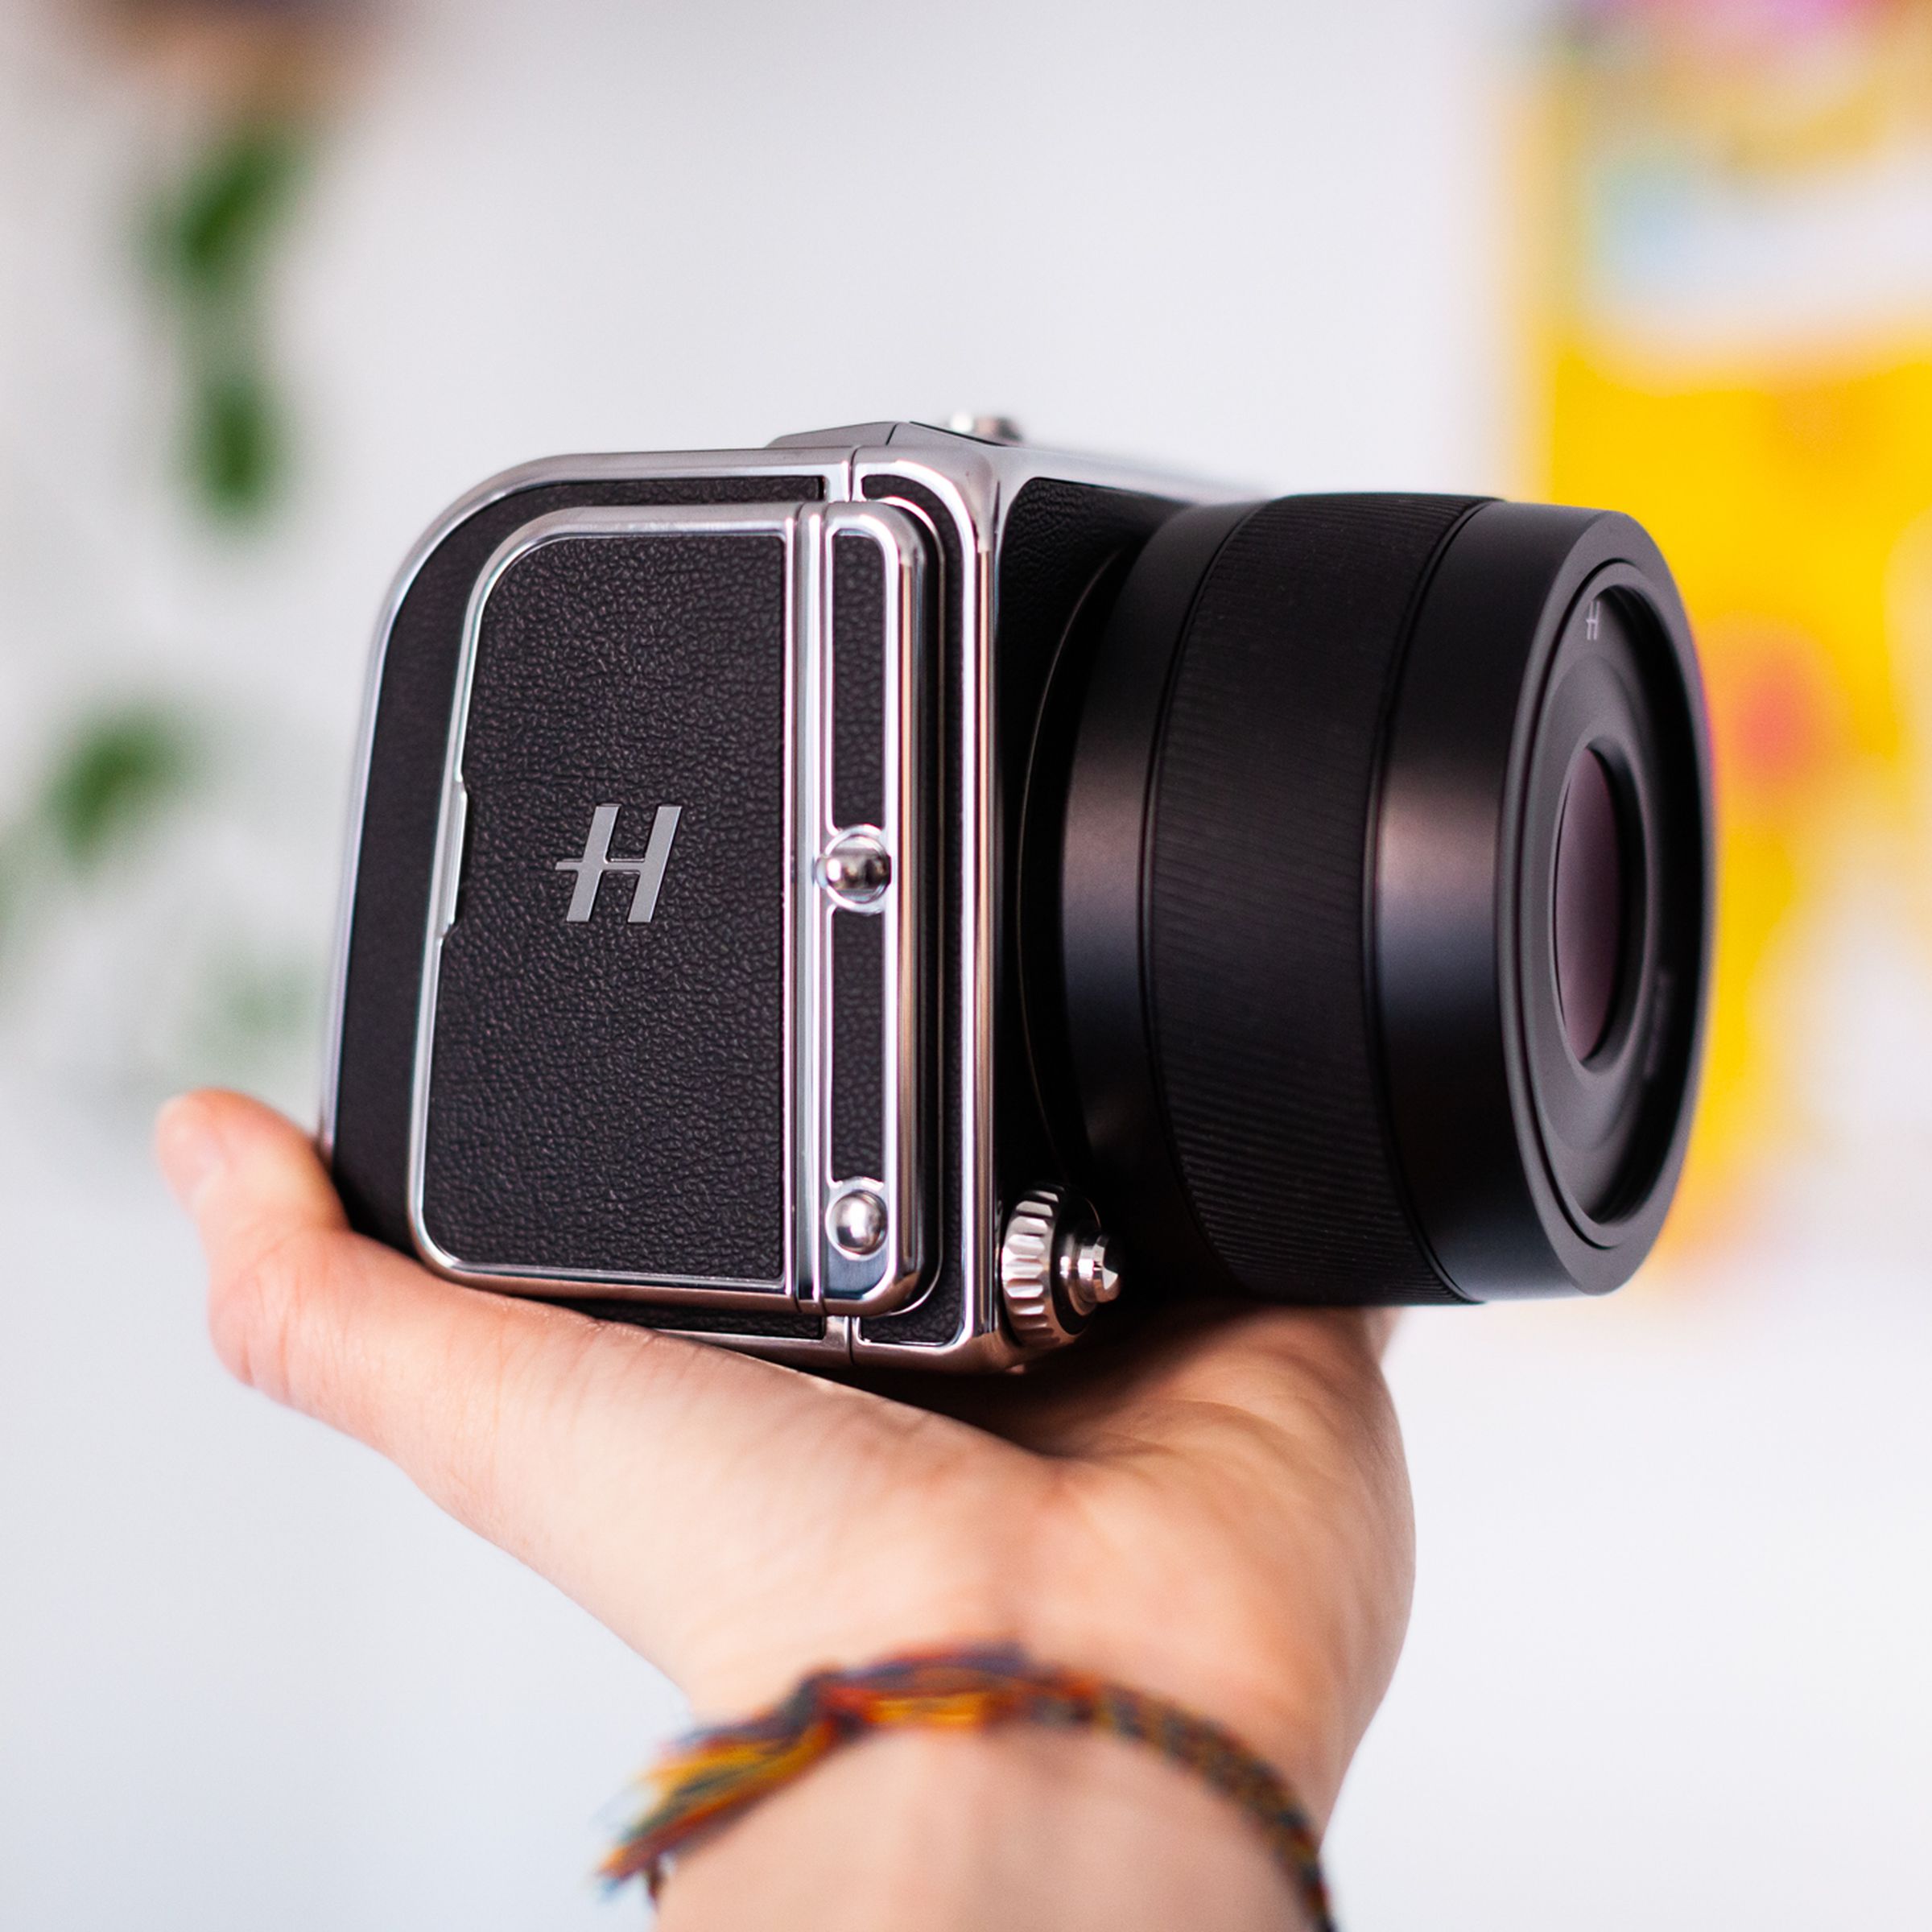 Hasselblad’s 907X 50C is a 740 gram metal box that fits in the palm of my hand.